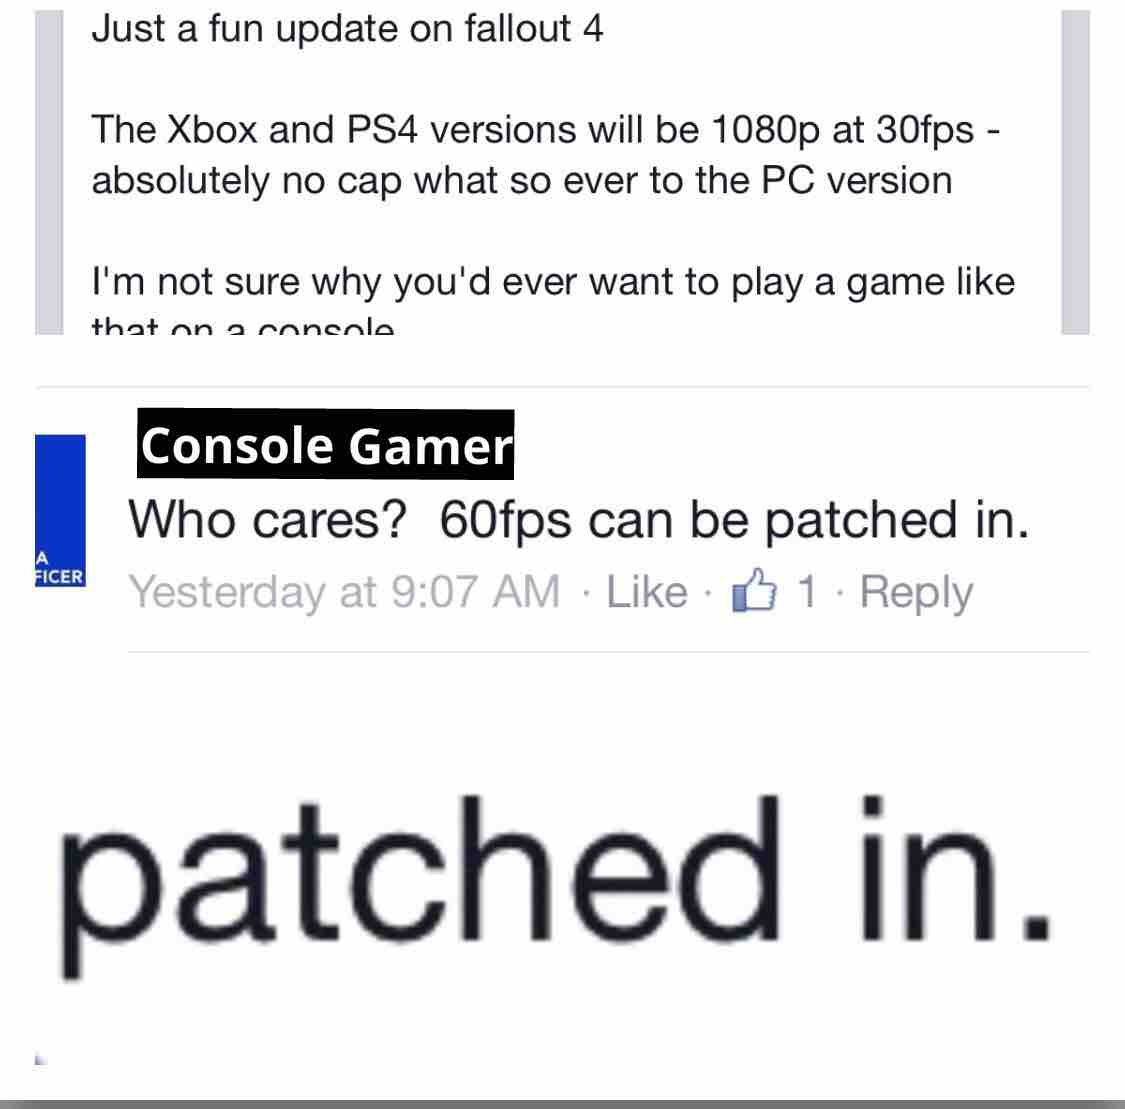 "Patched in 60 FPS"